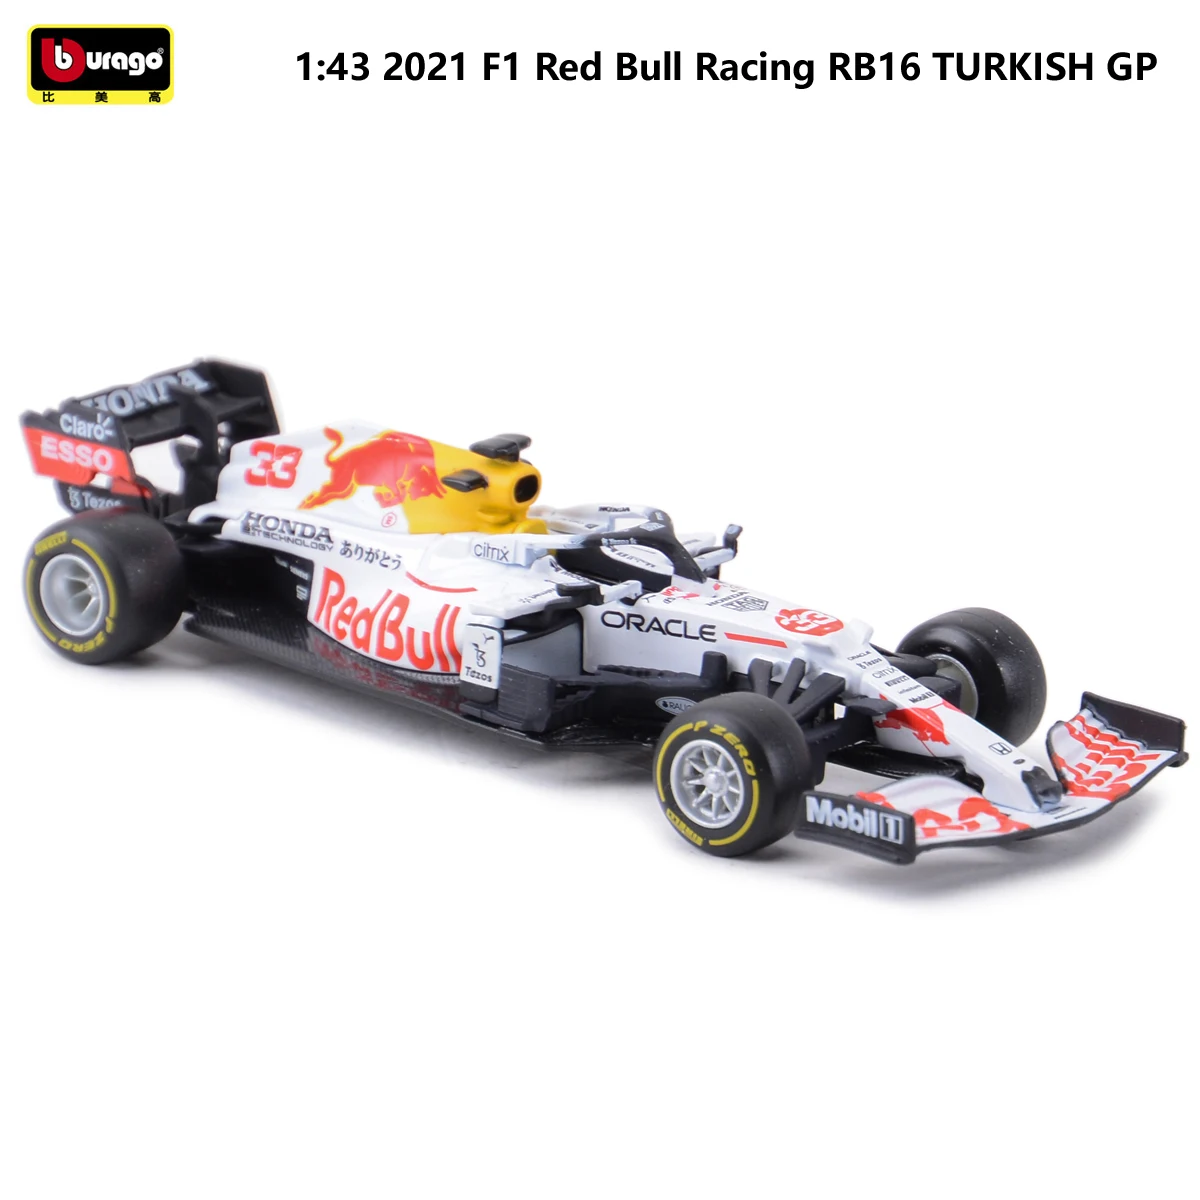 2021 Bburago Diecast 1:43 Car Red Bull Racing F1 Car RB16B Infiniti Racing Model Alloy Toy Formulaed One Car Collection Kid Gift